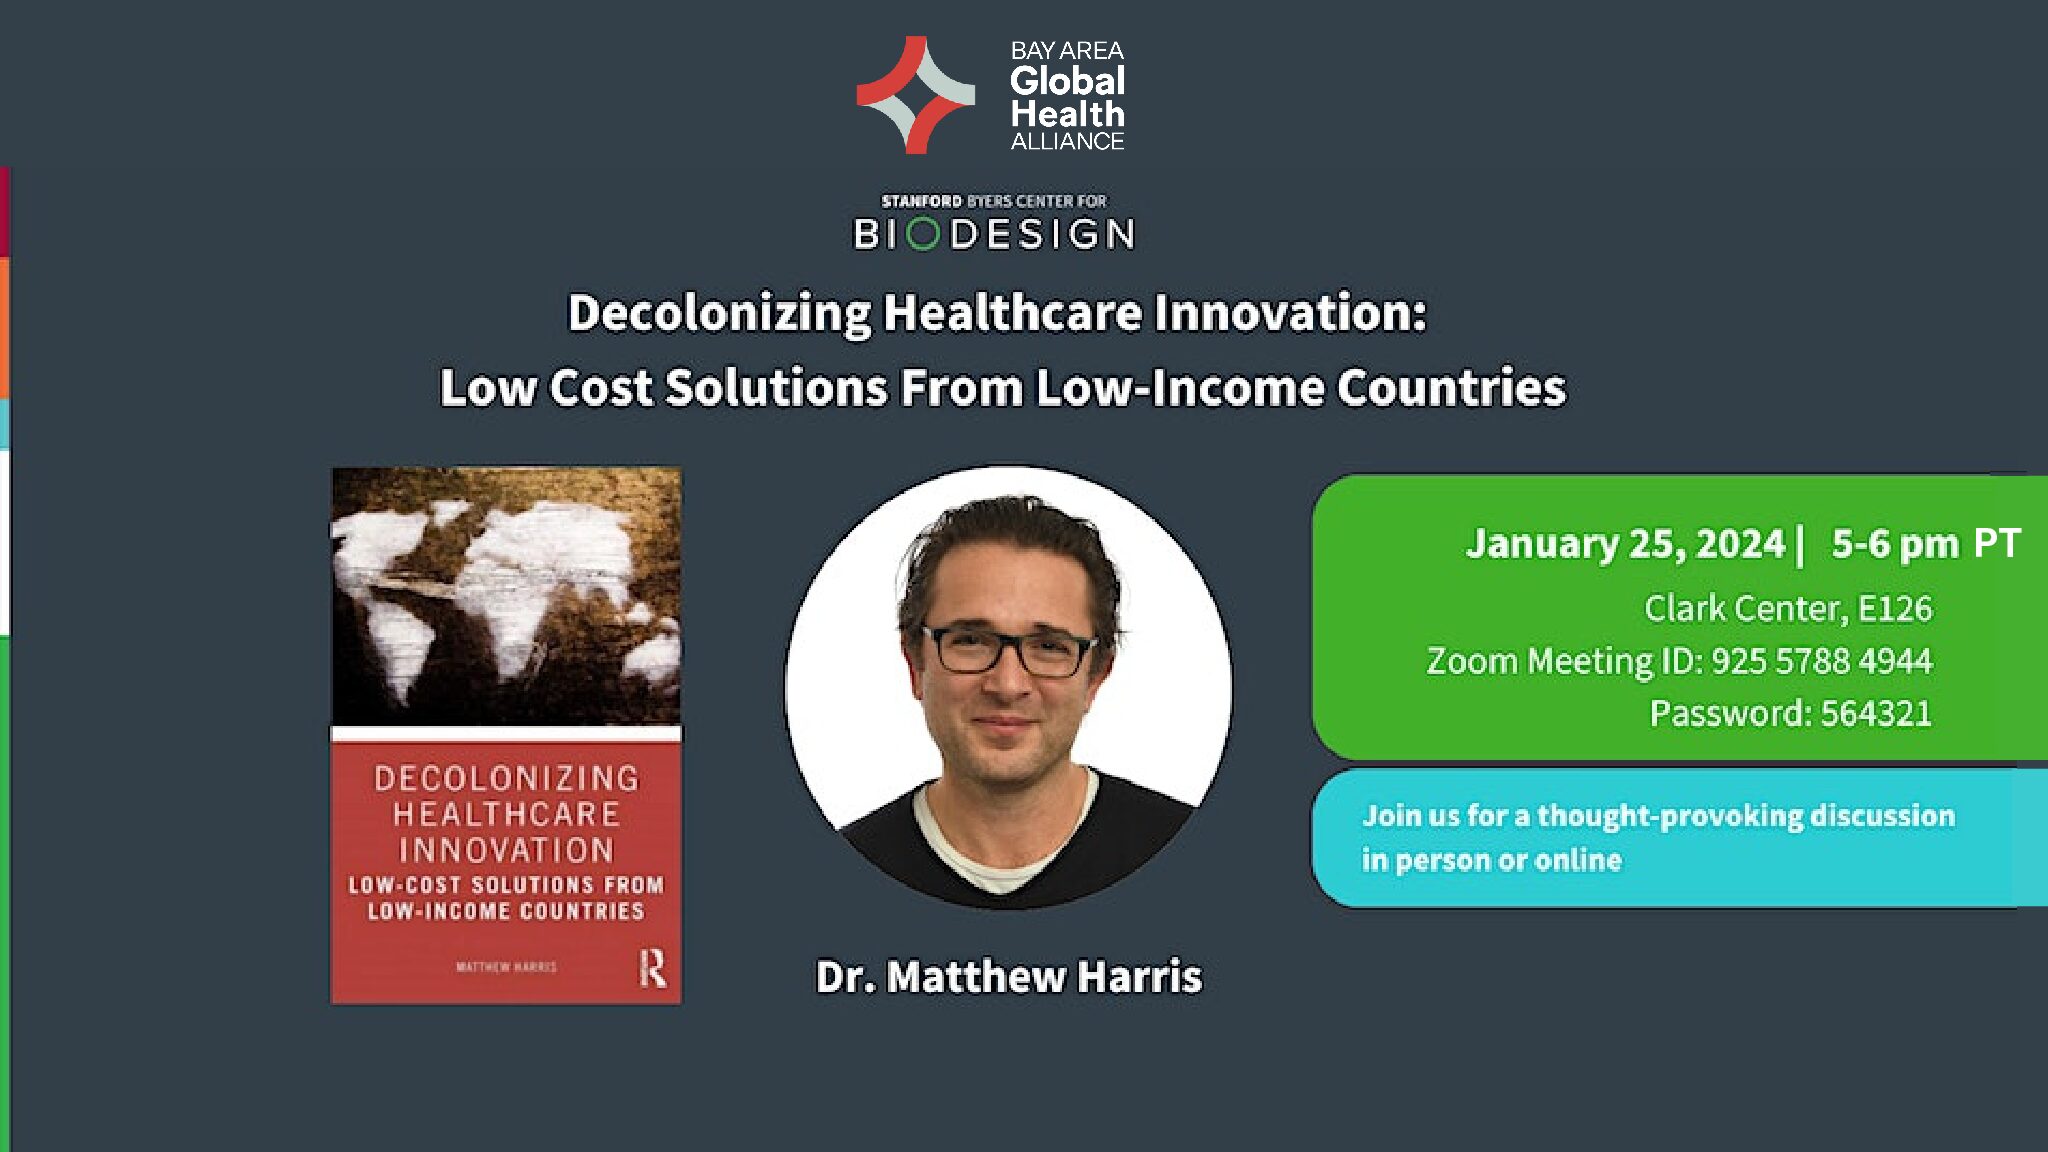 Decolonizing Healthcare Innovation with Dr. Matthew Harris